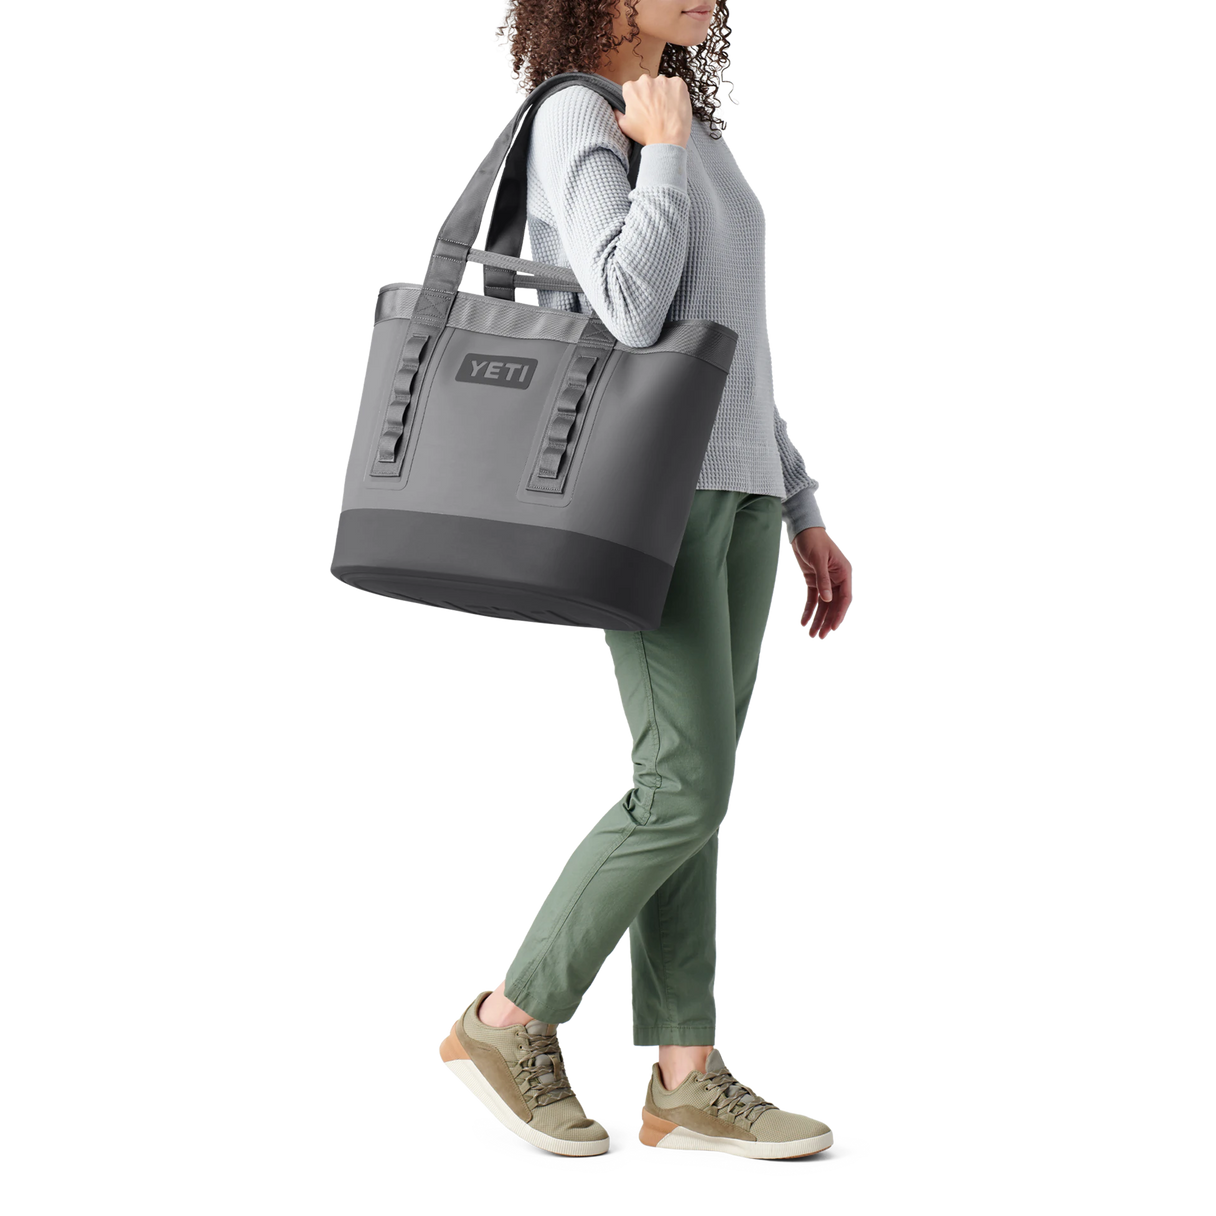 YETI - Now Available: Camino Carryall. It's the perfect